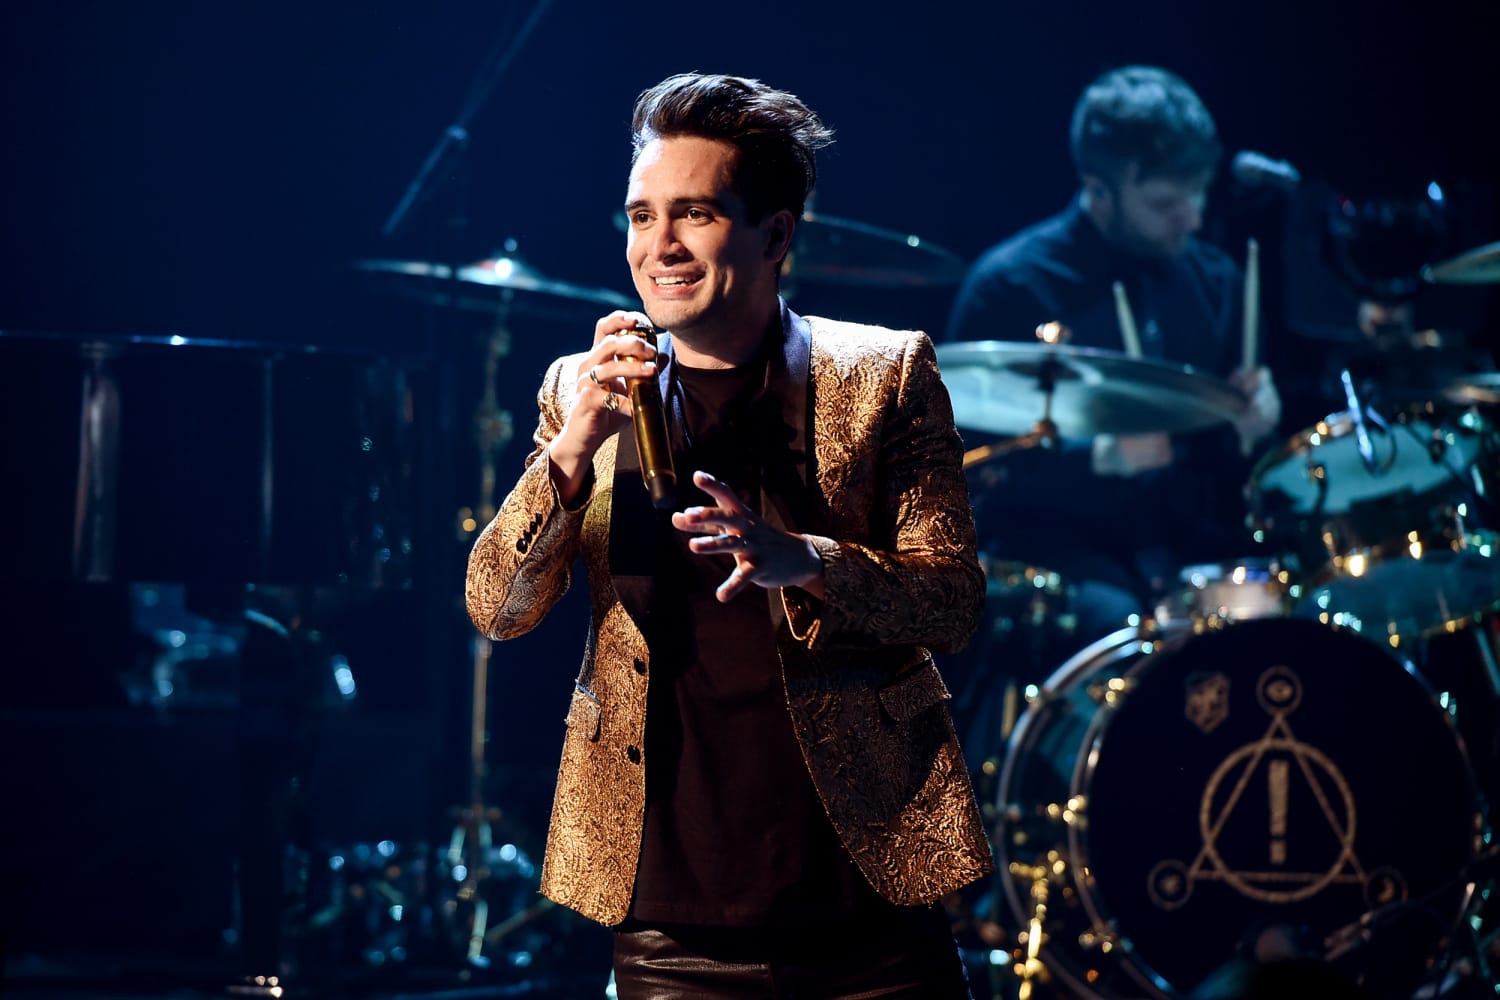 Panic! At The Disco breaks up as the lead singer shares personal news